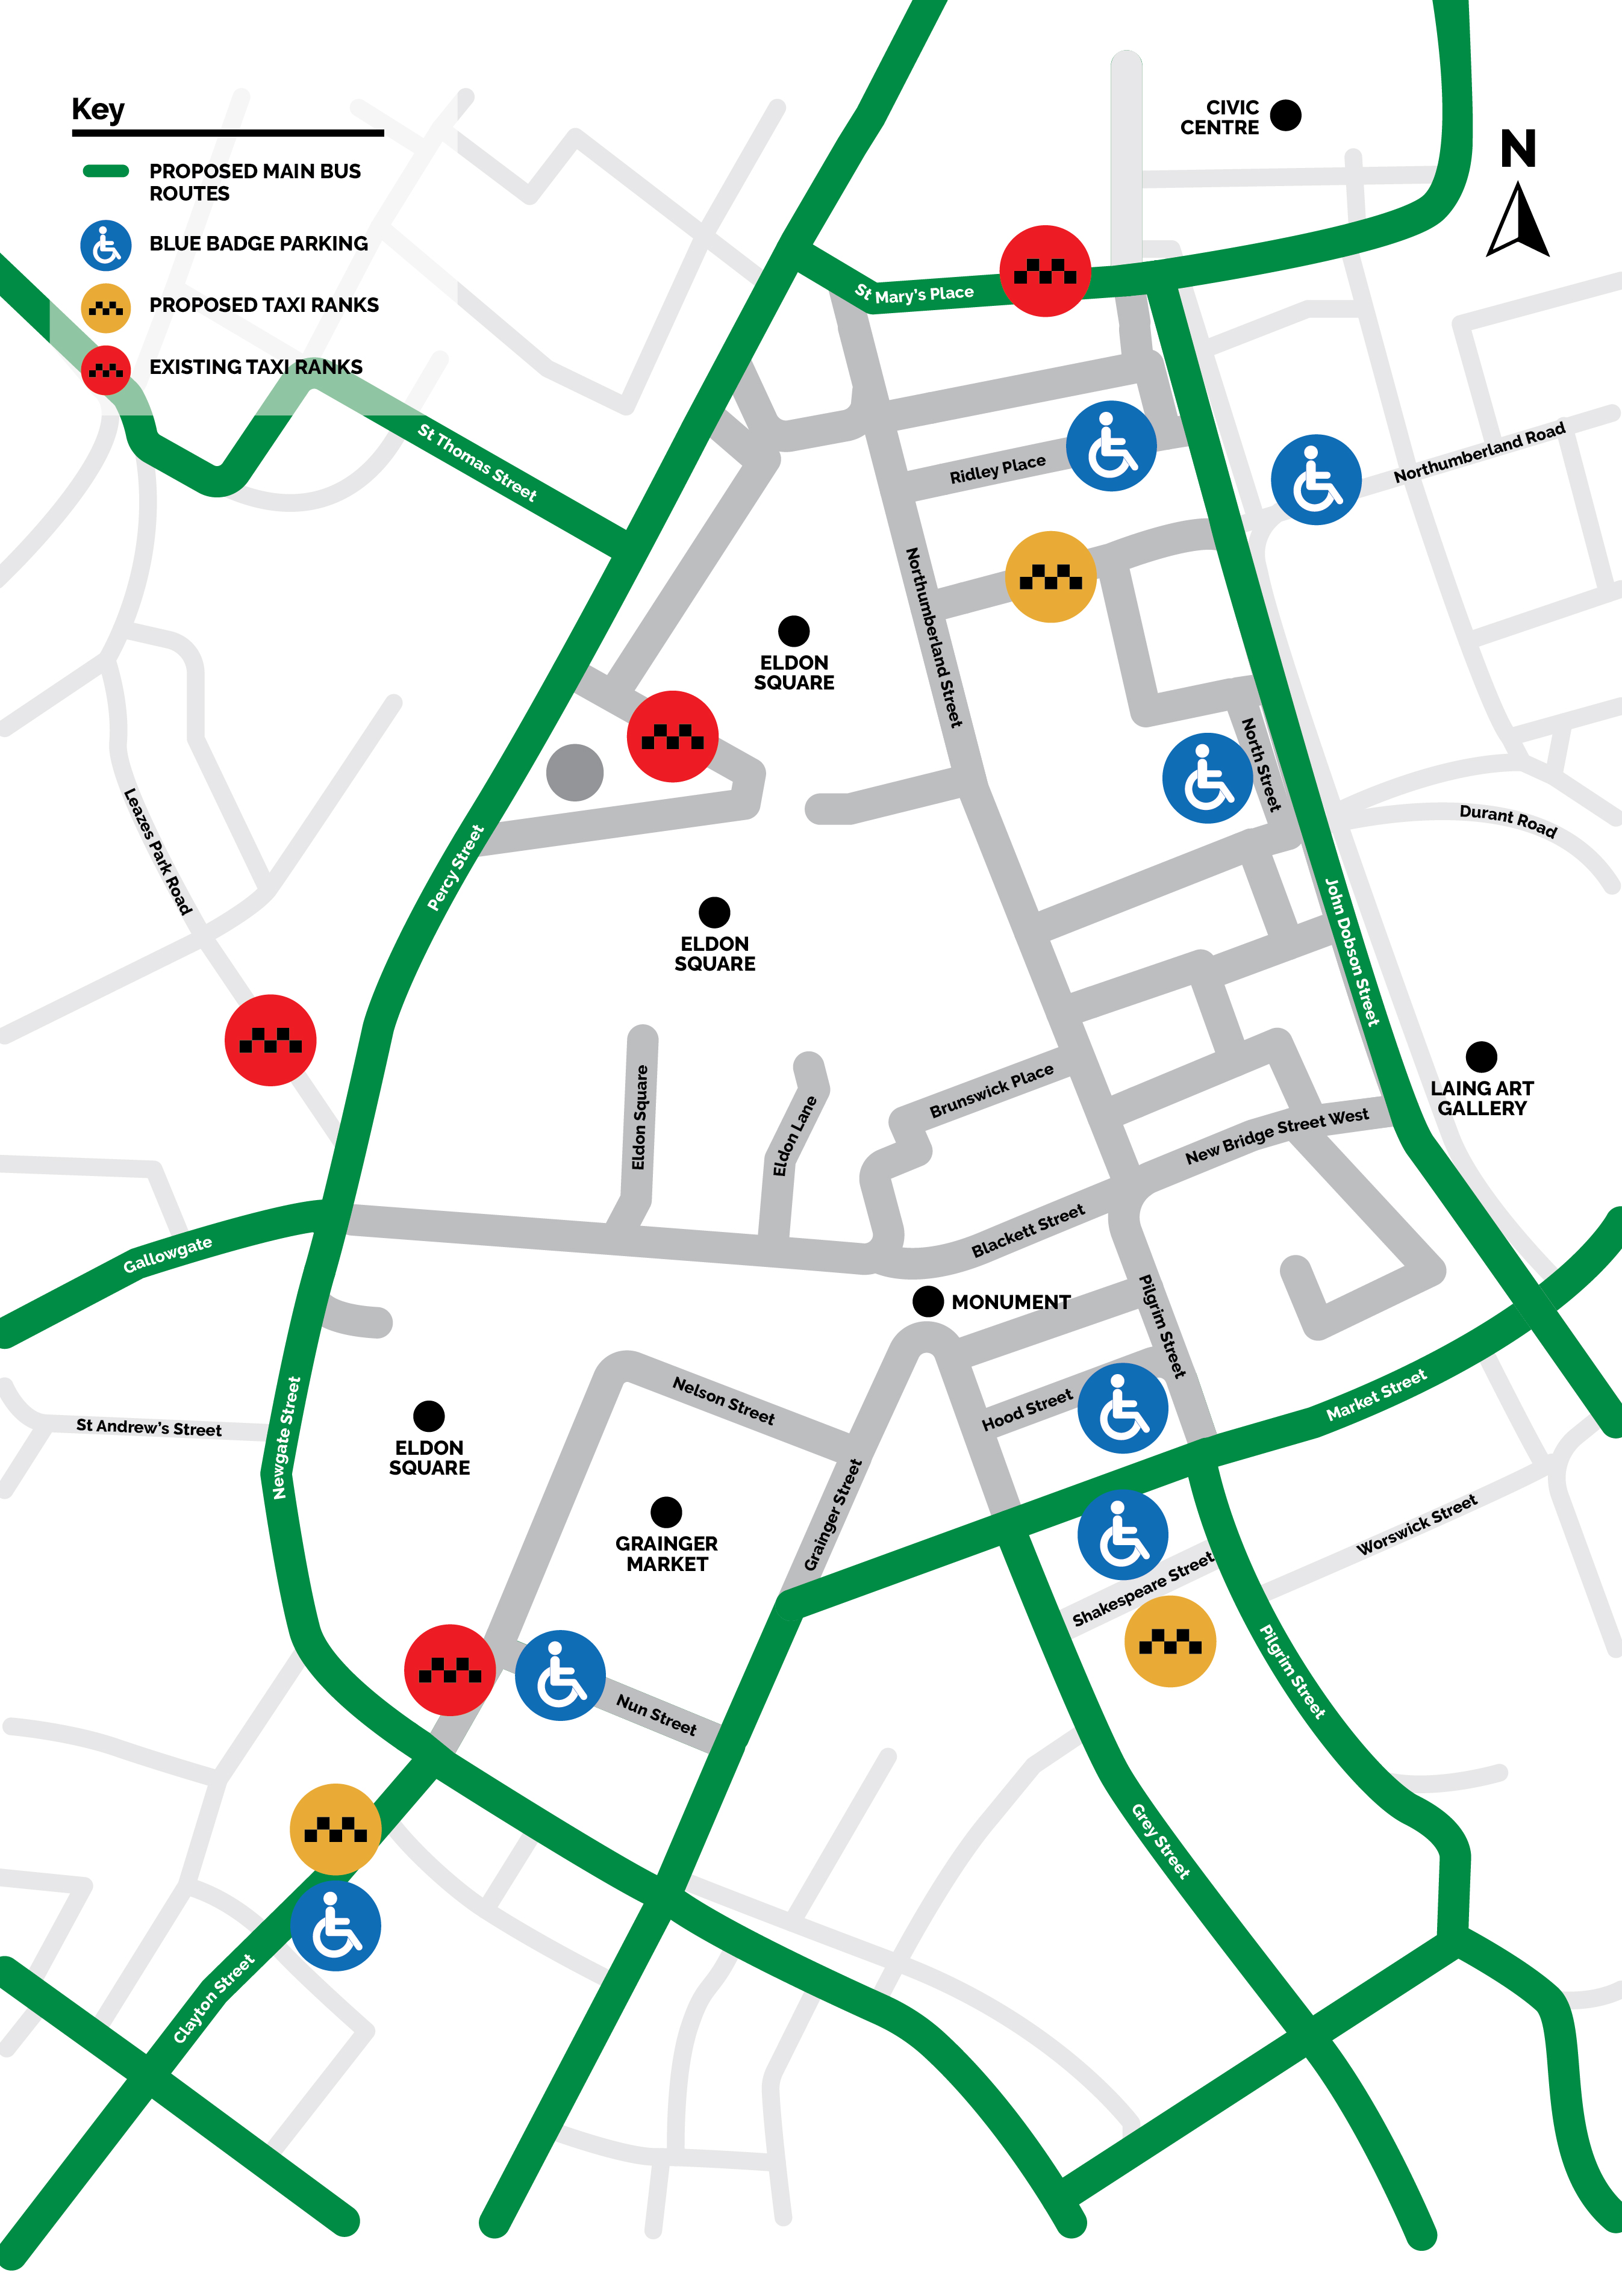 Map of parking and taxi rank changes